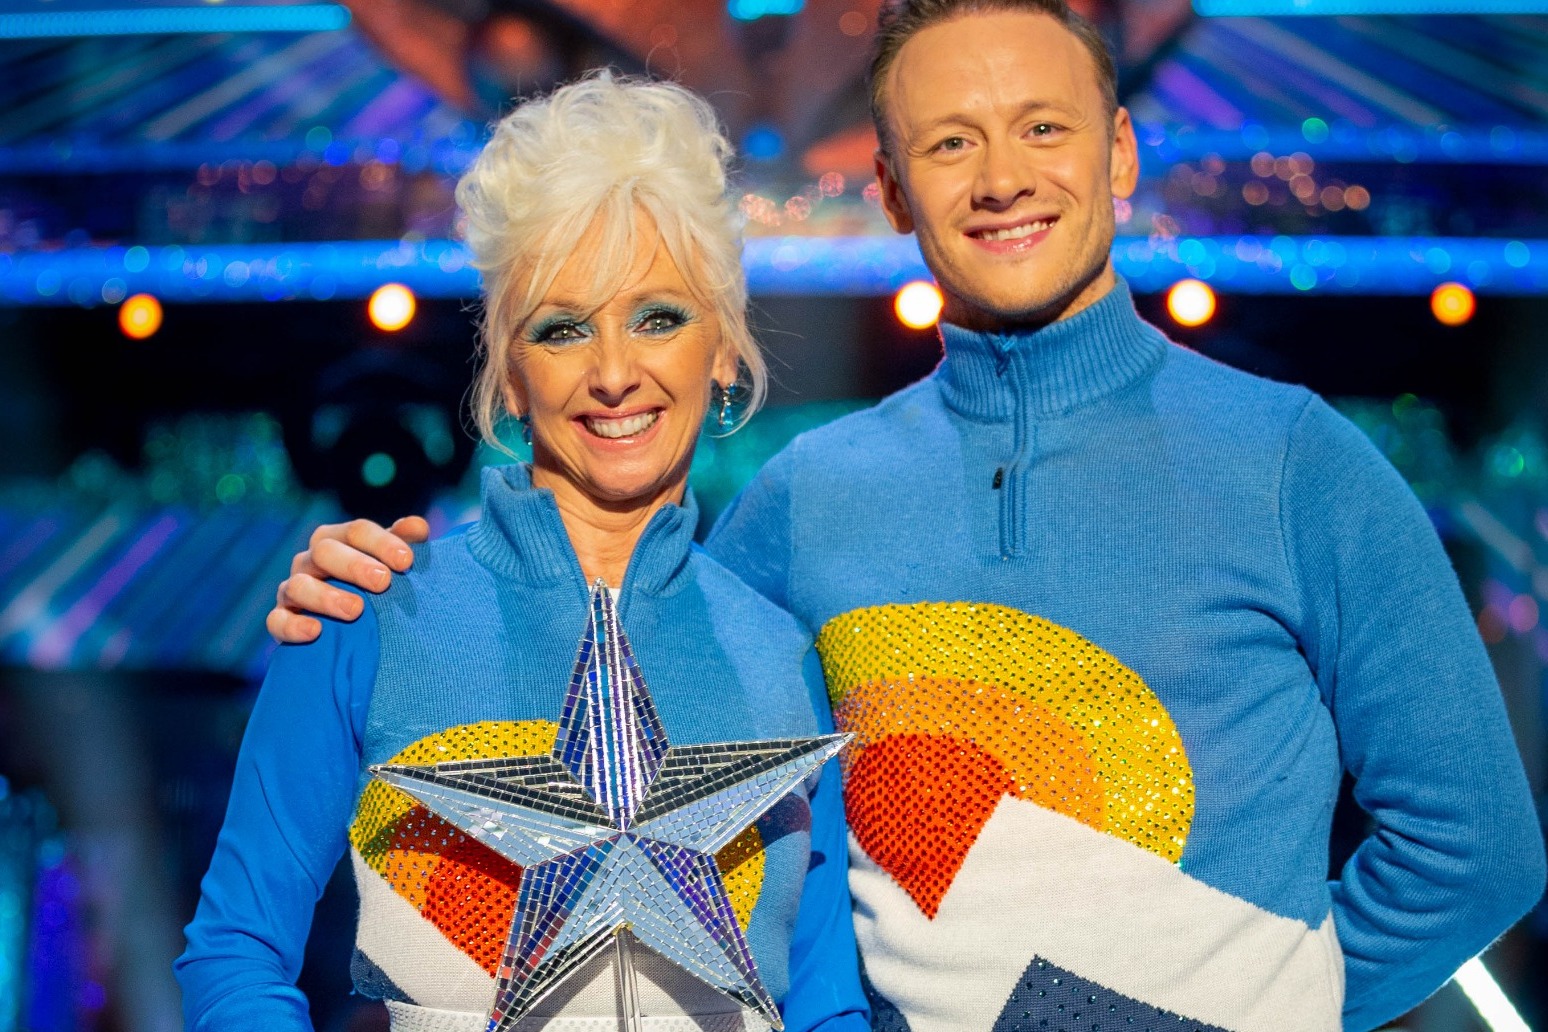 Debbie McGee says Strictly helped reshape her life after Paul Daniels’ death 